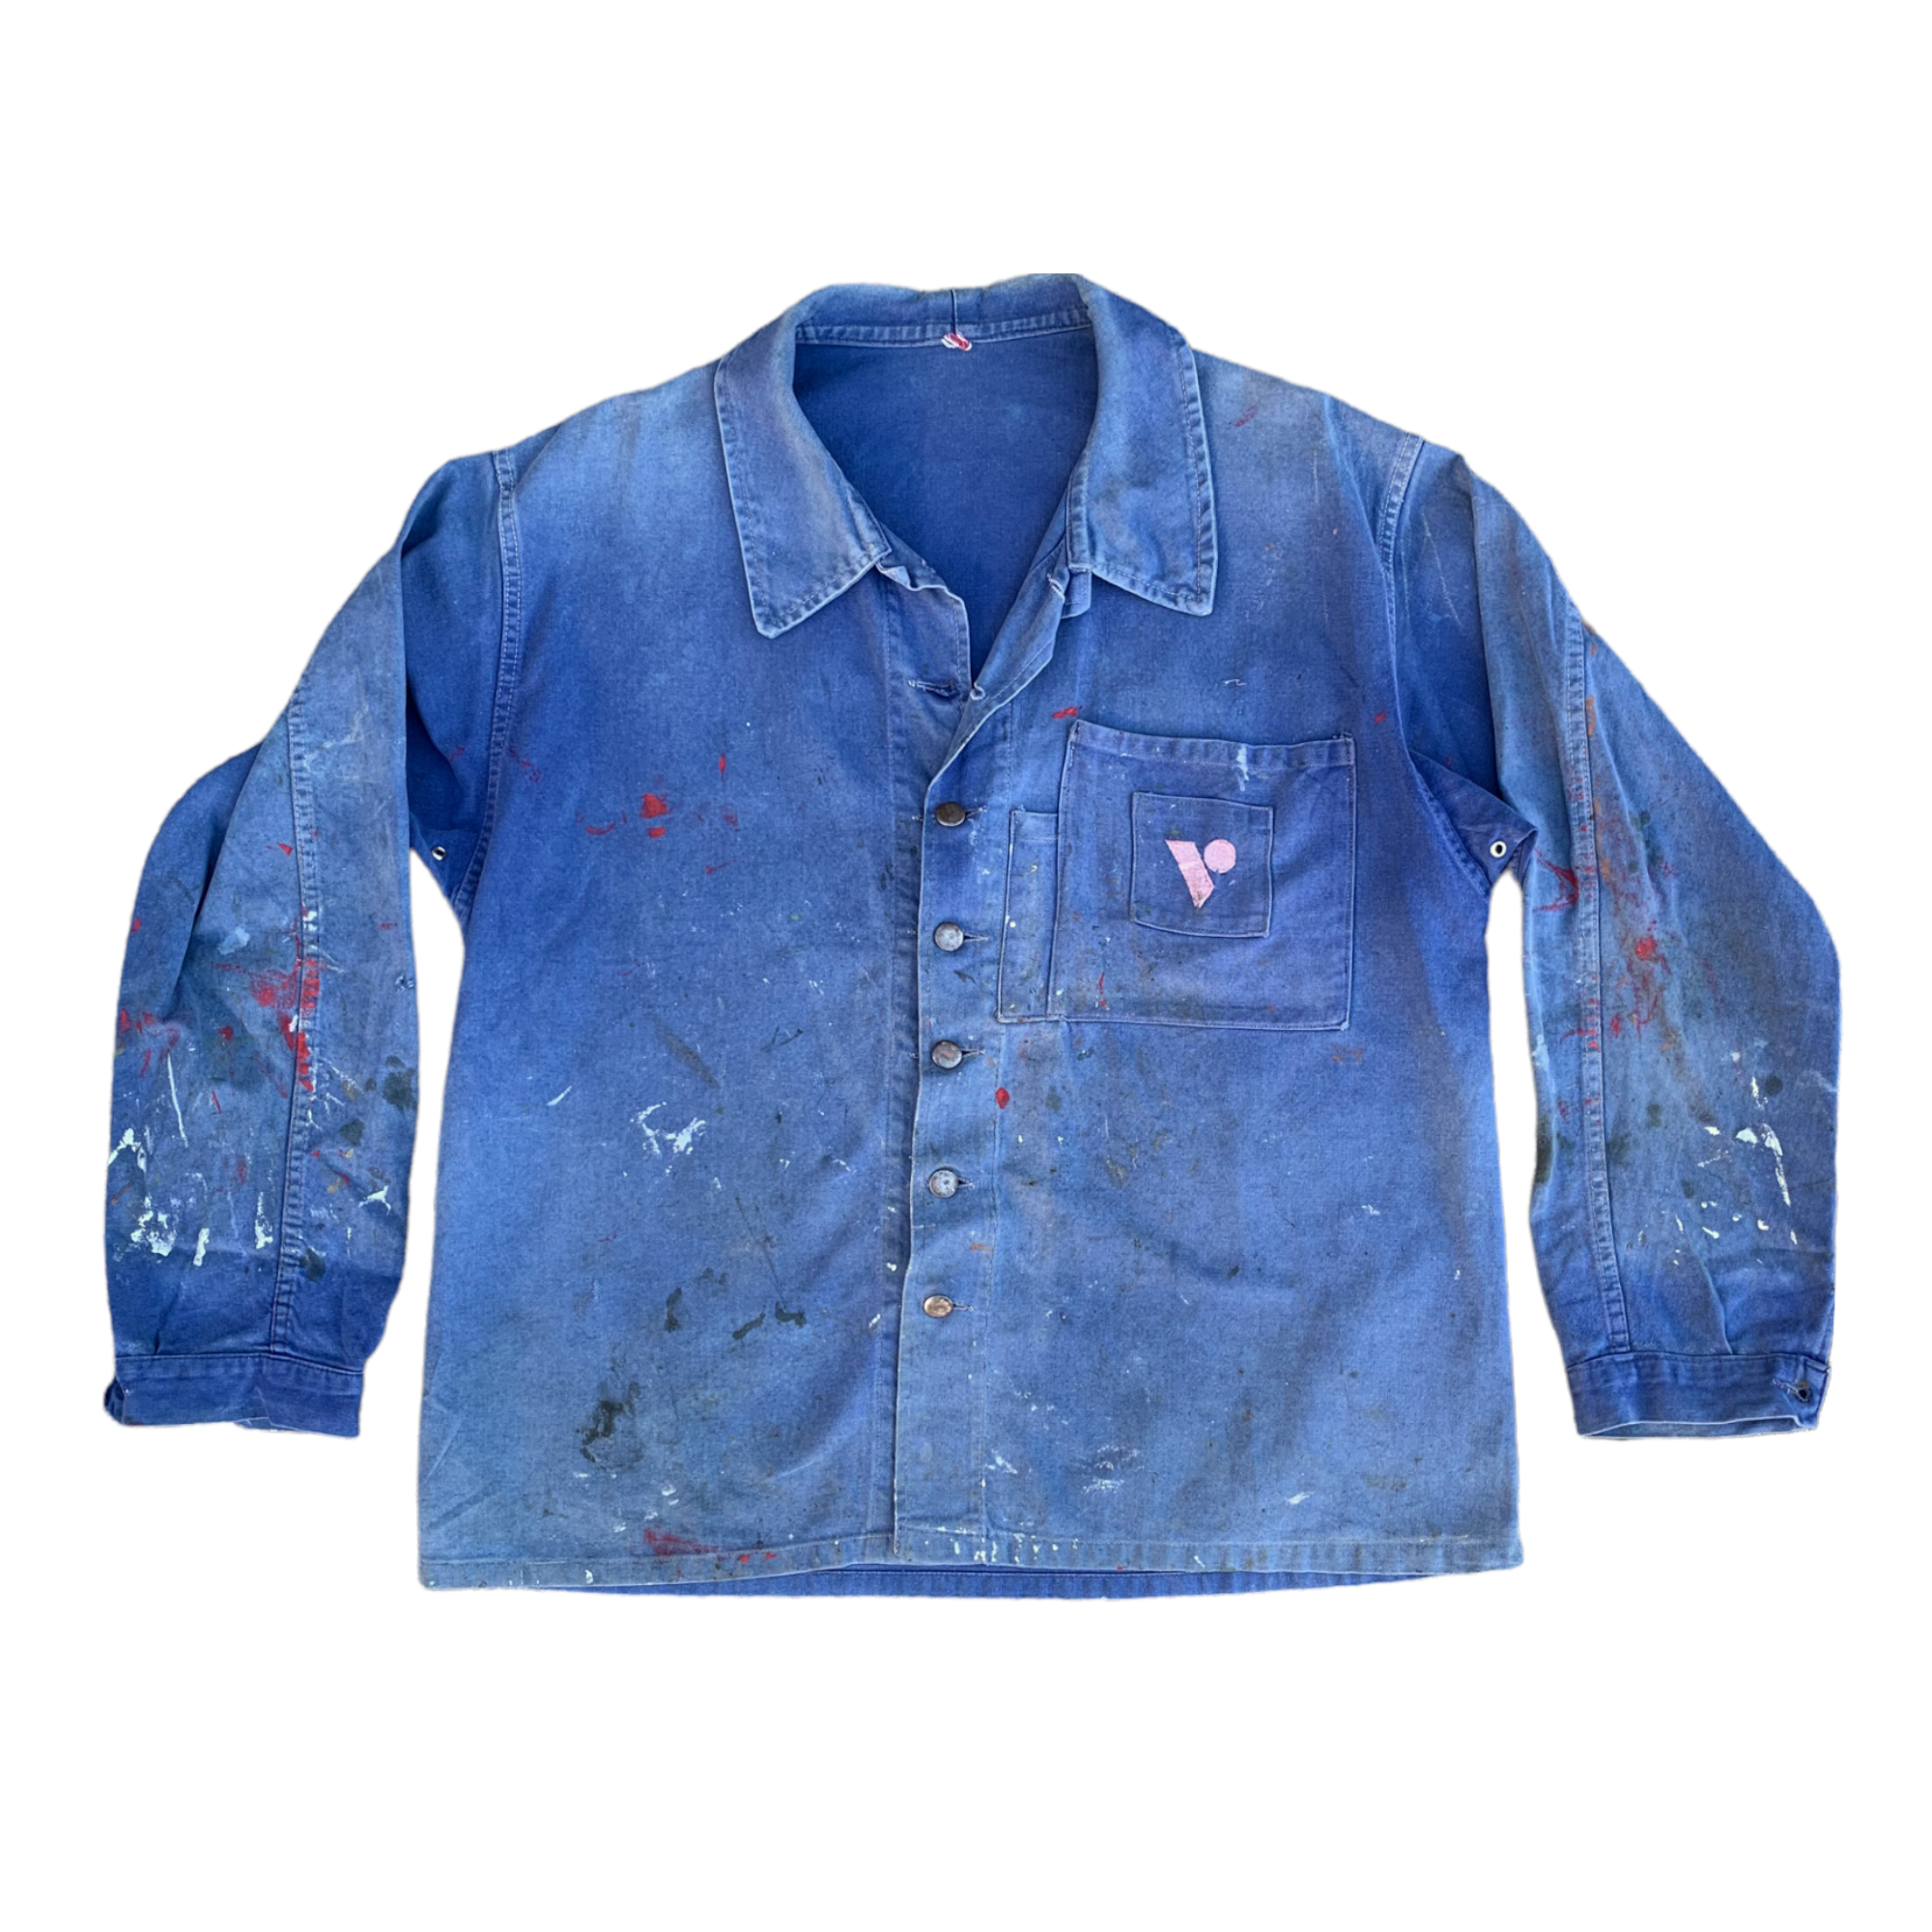 1970s French Work Jacket with Metal Buttons, Embroidered Logo, and Paint Distressing - Faded Blue - L/XL